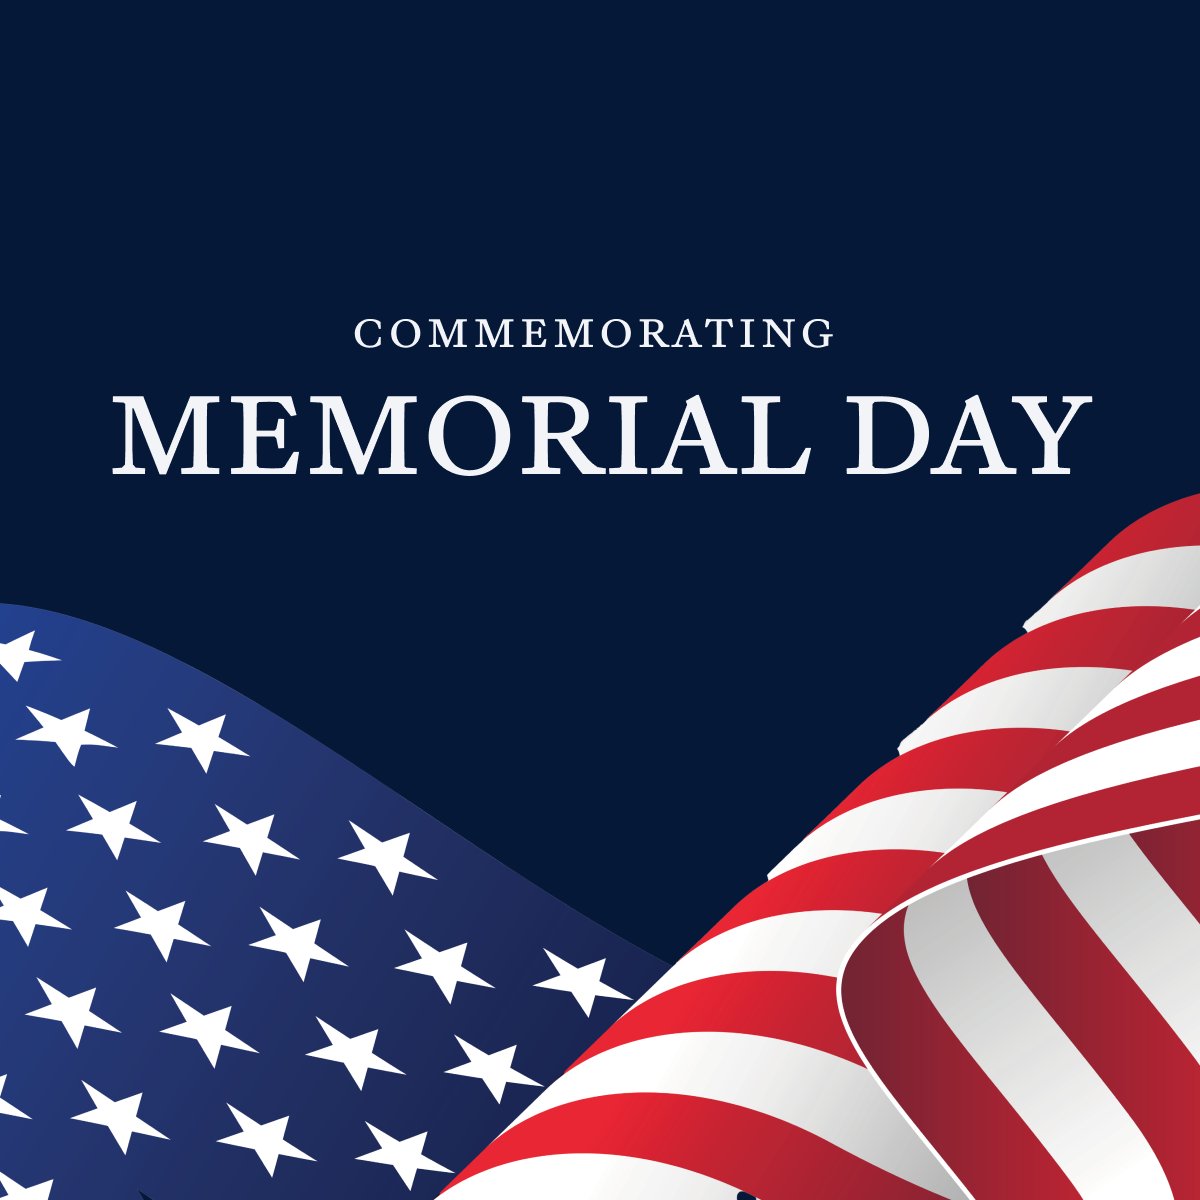 On Memorial Day, we honor the fallen heroes who served and sacrificed for our freedom and for our future. We must never forget the price that was paid to protect our democracy.